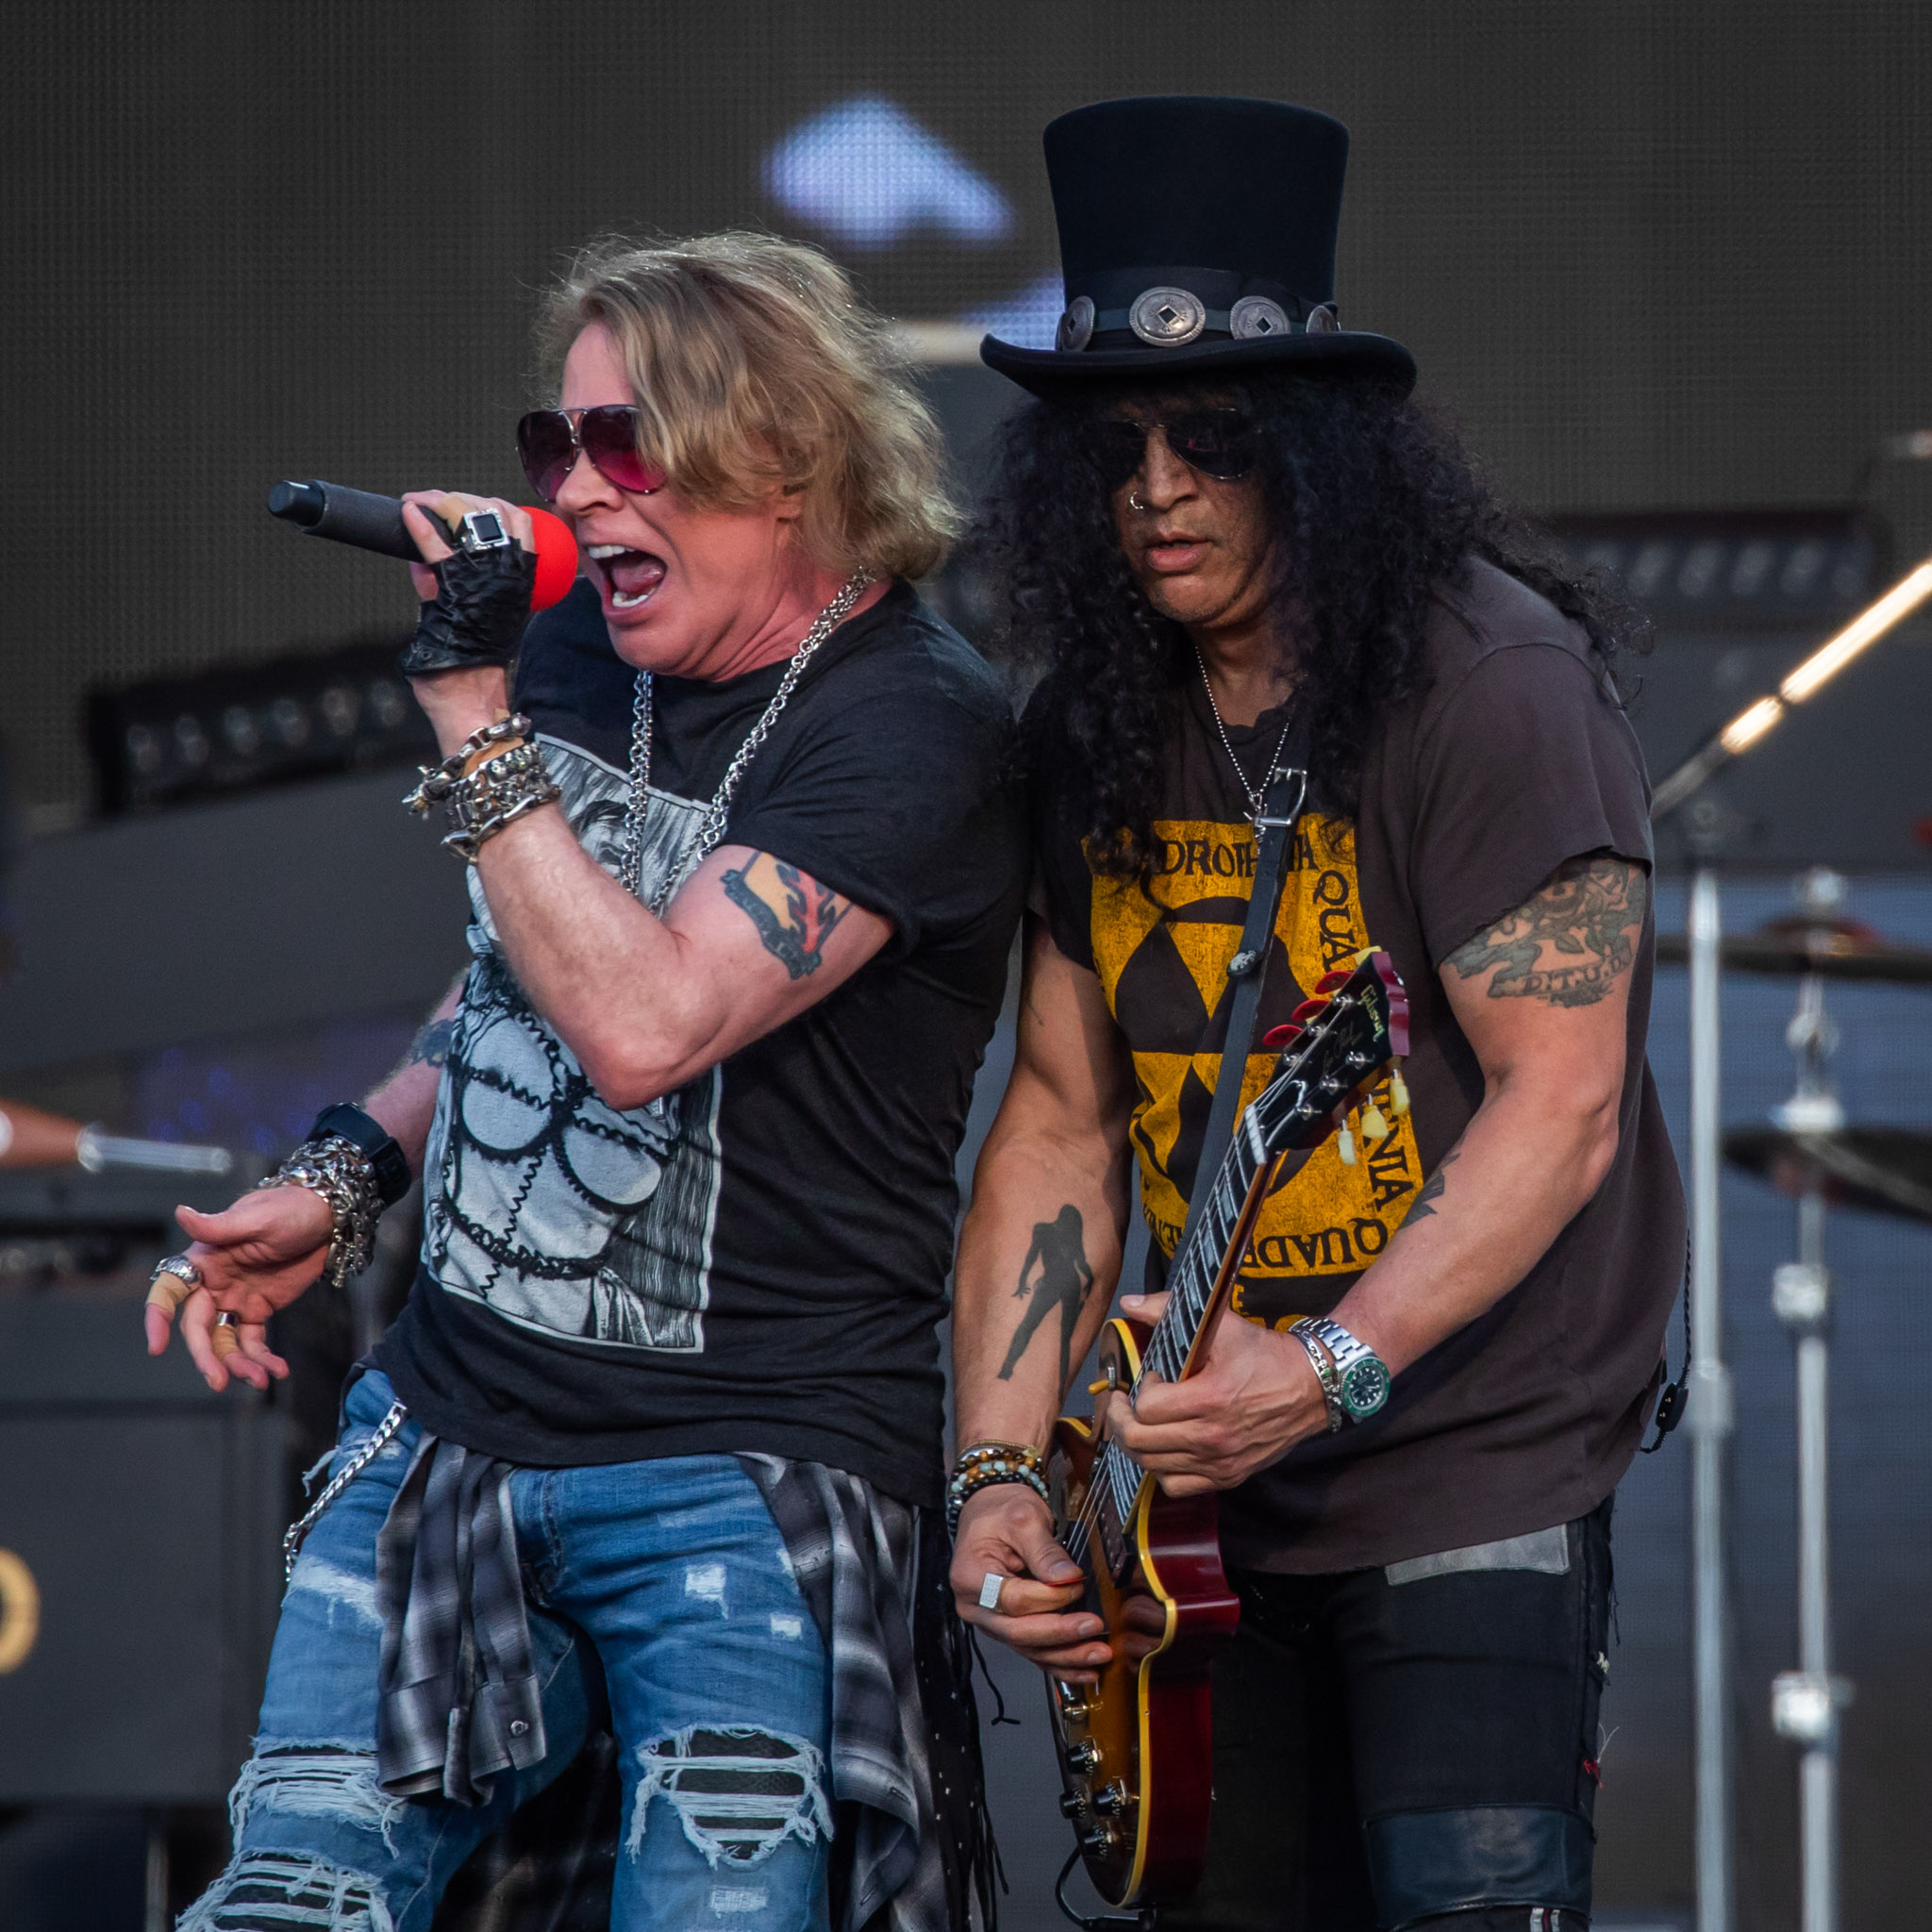 Guns n Roses by Bullet-ray Photography